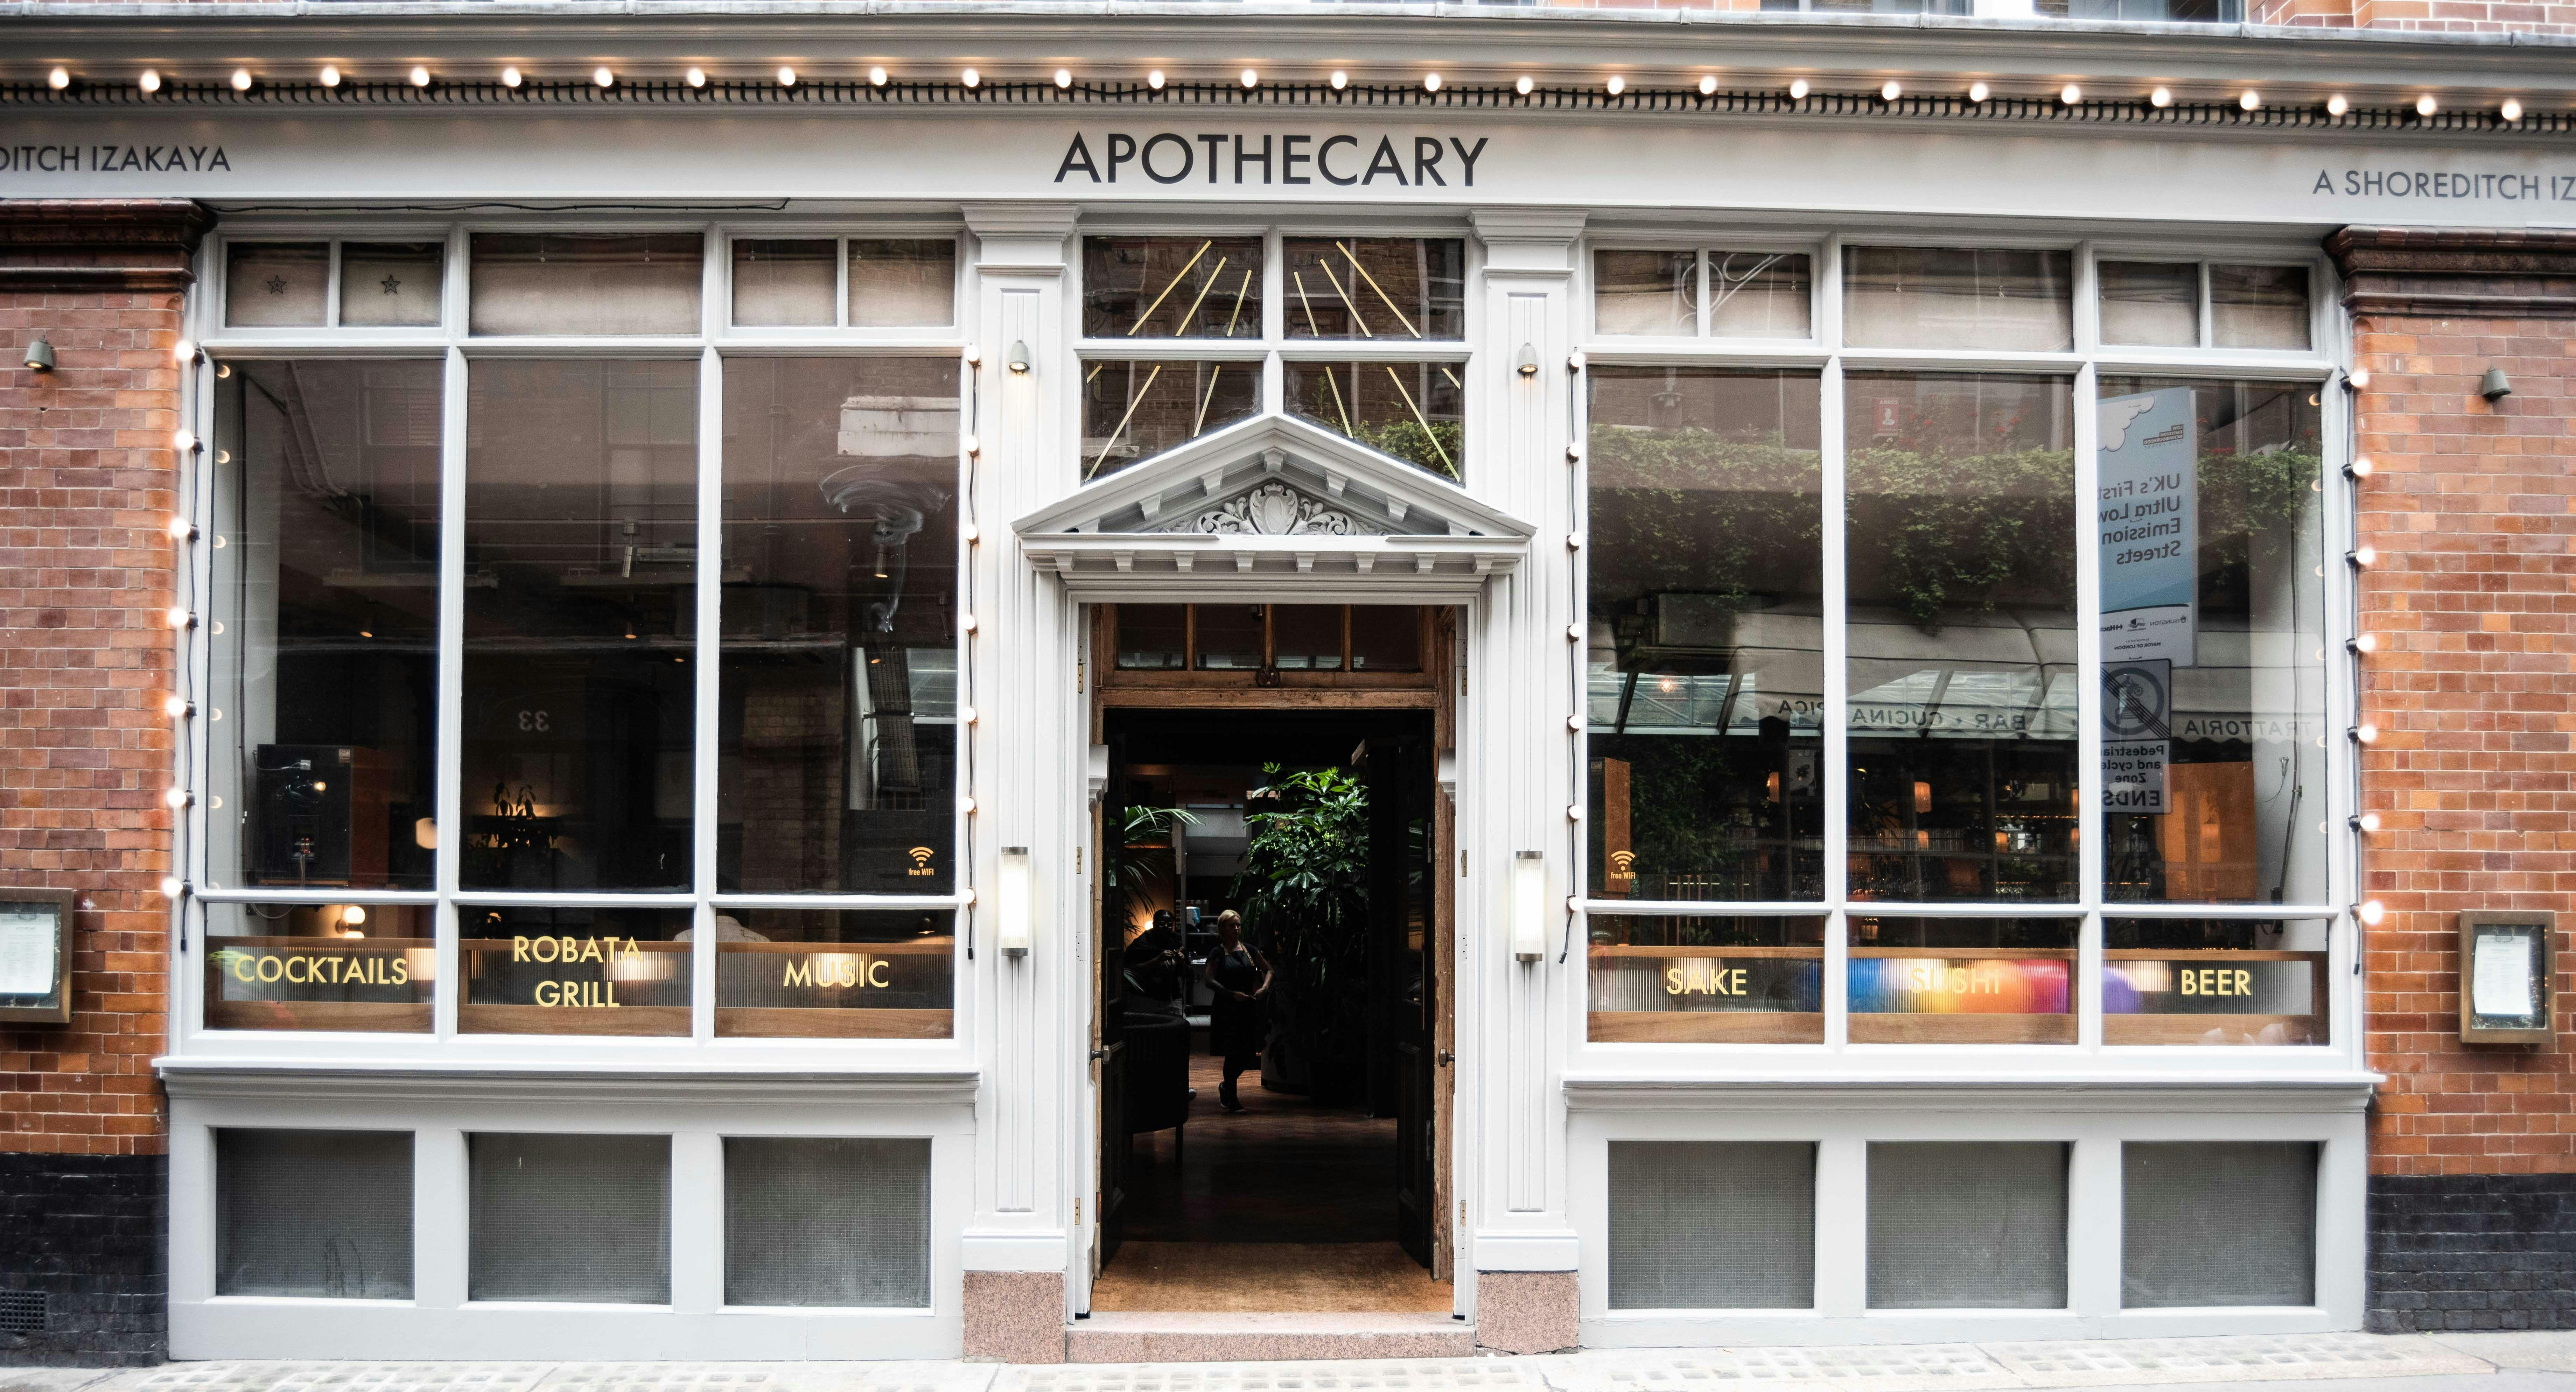 Photo of restaurant Apothecary in Shoreditch, London